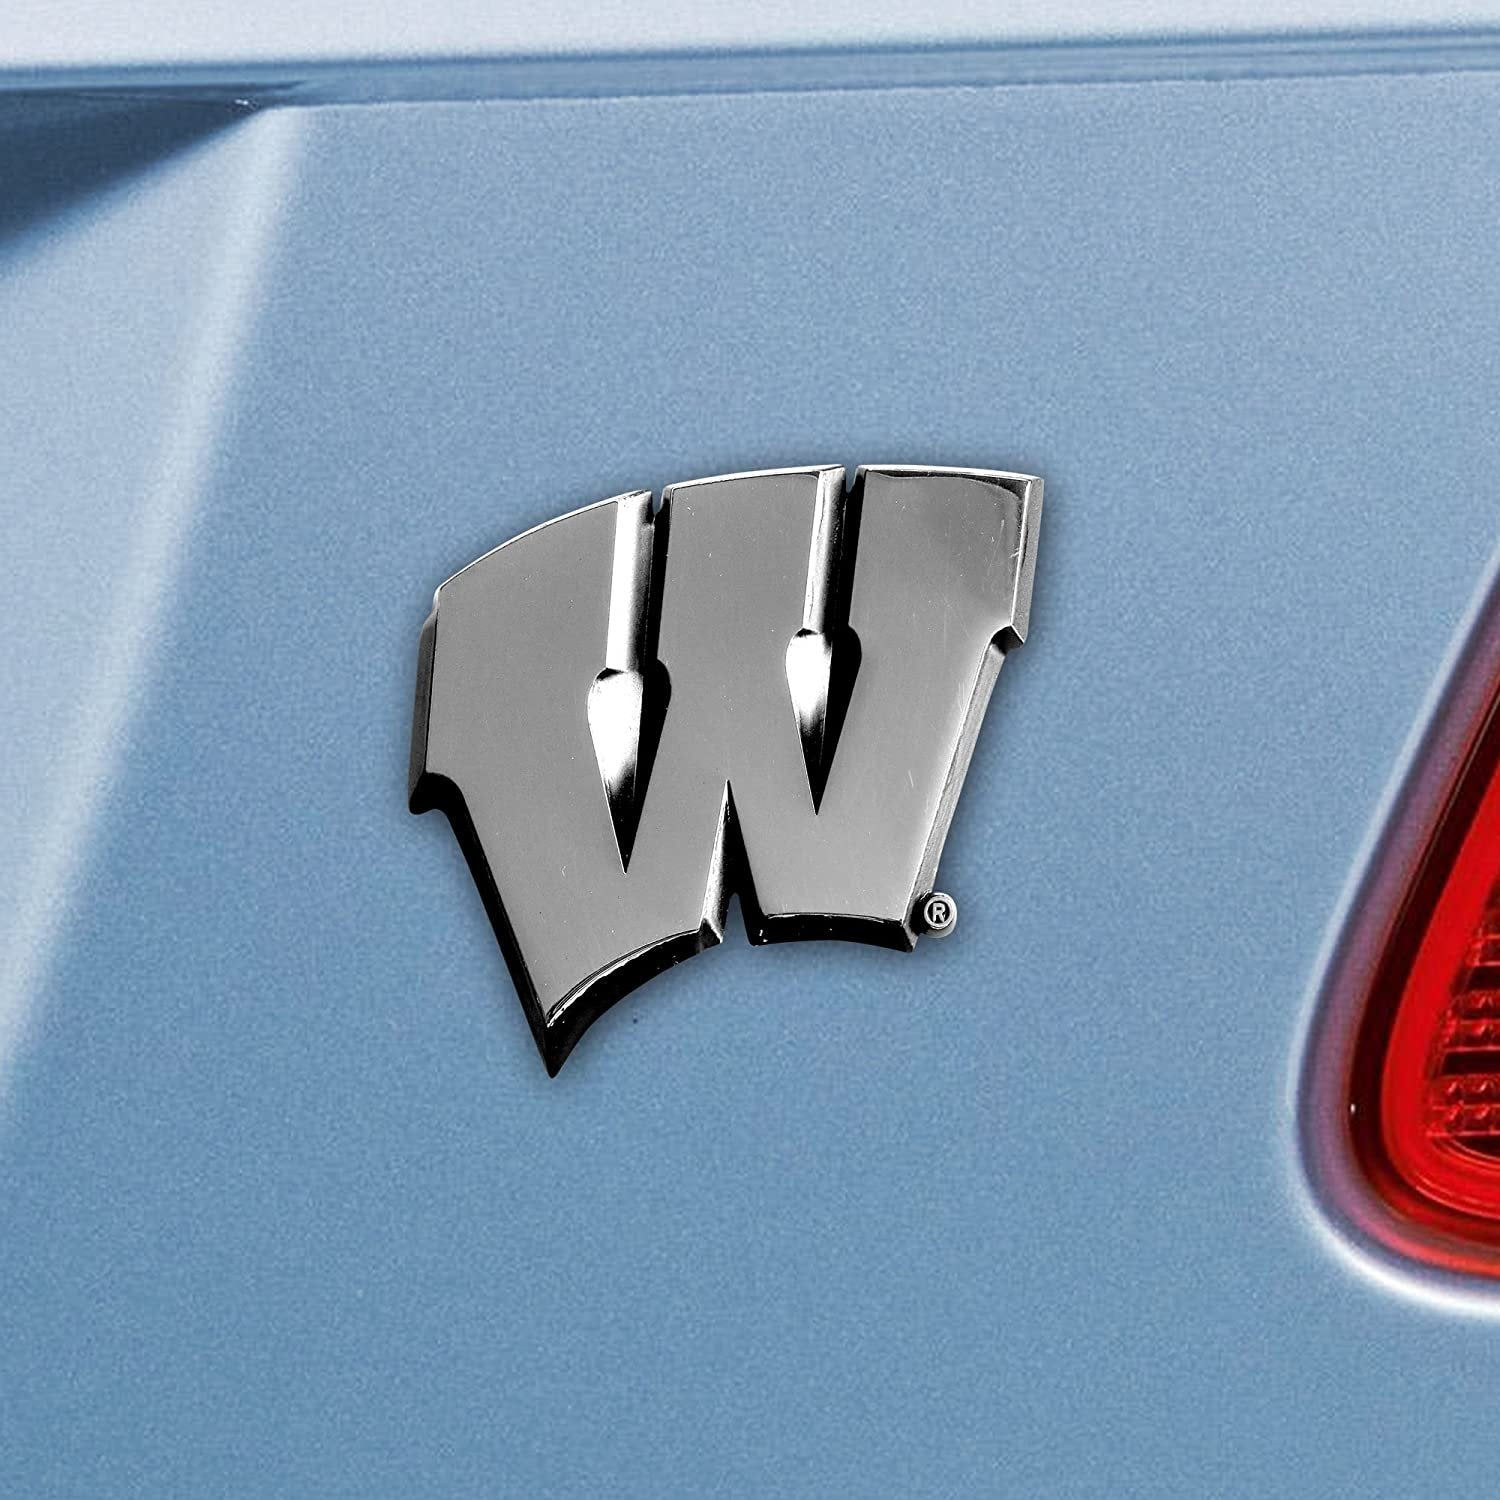 University of Wisconsin Badgers Solid Metal Raised Auto Emblem Decal Adhesive Backing